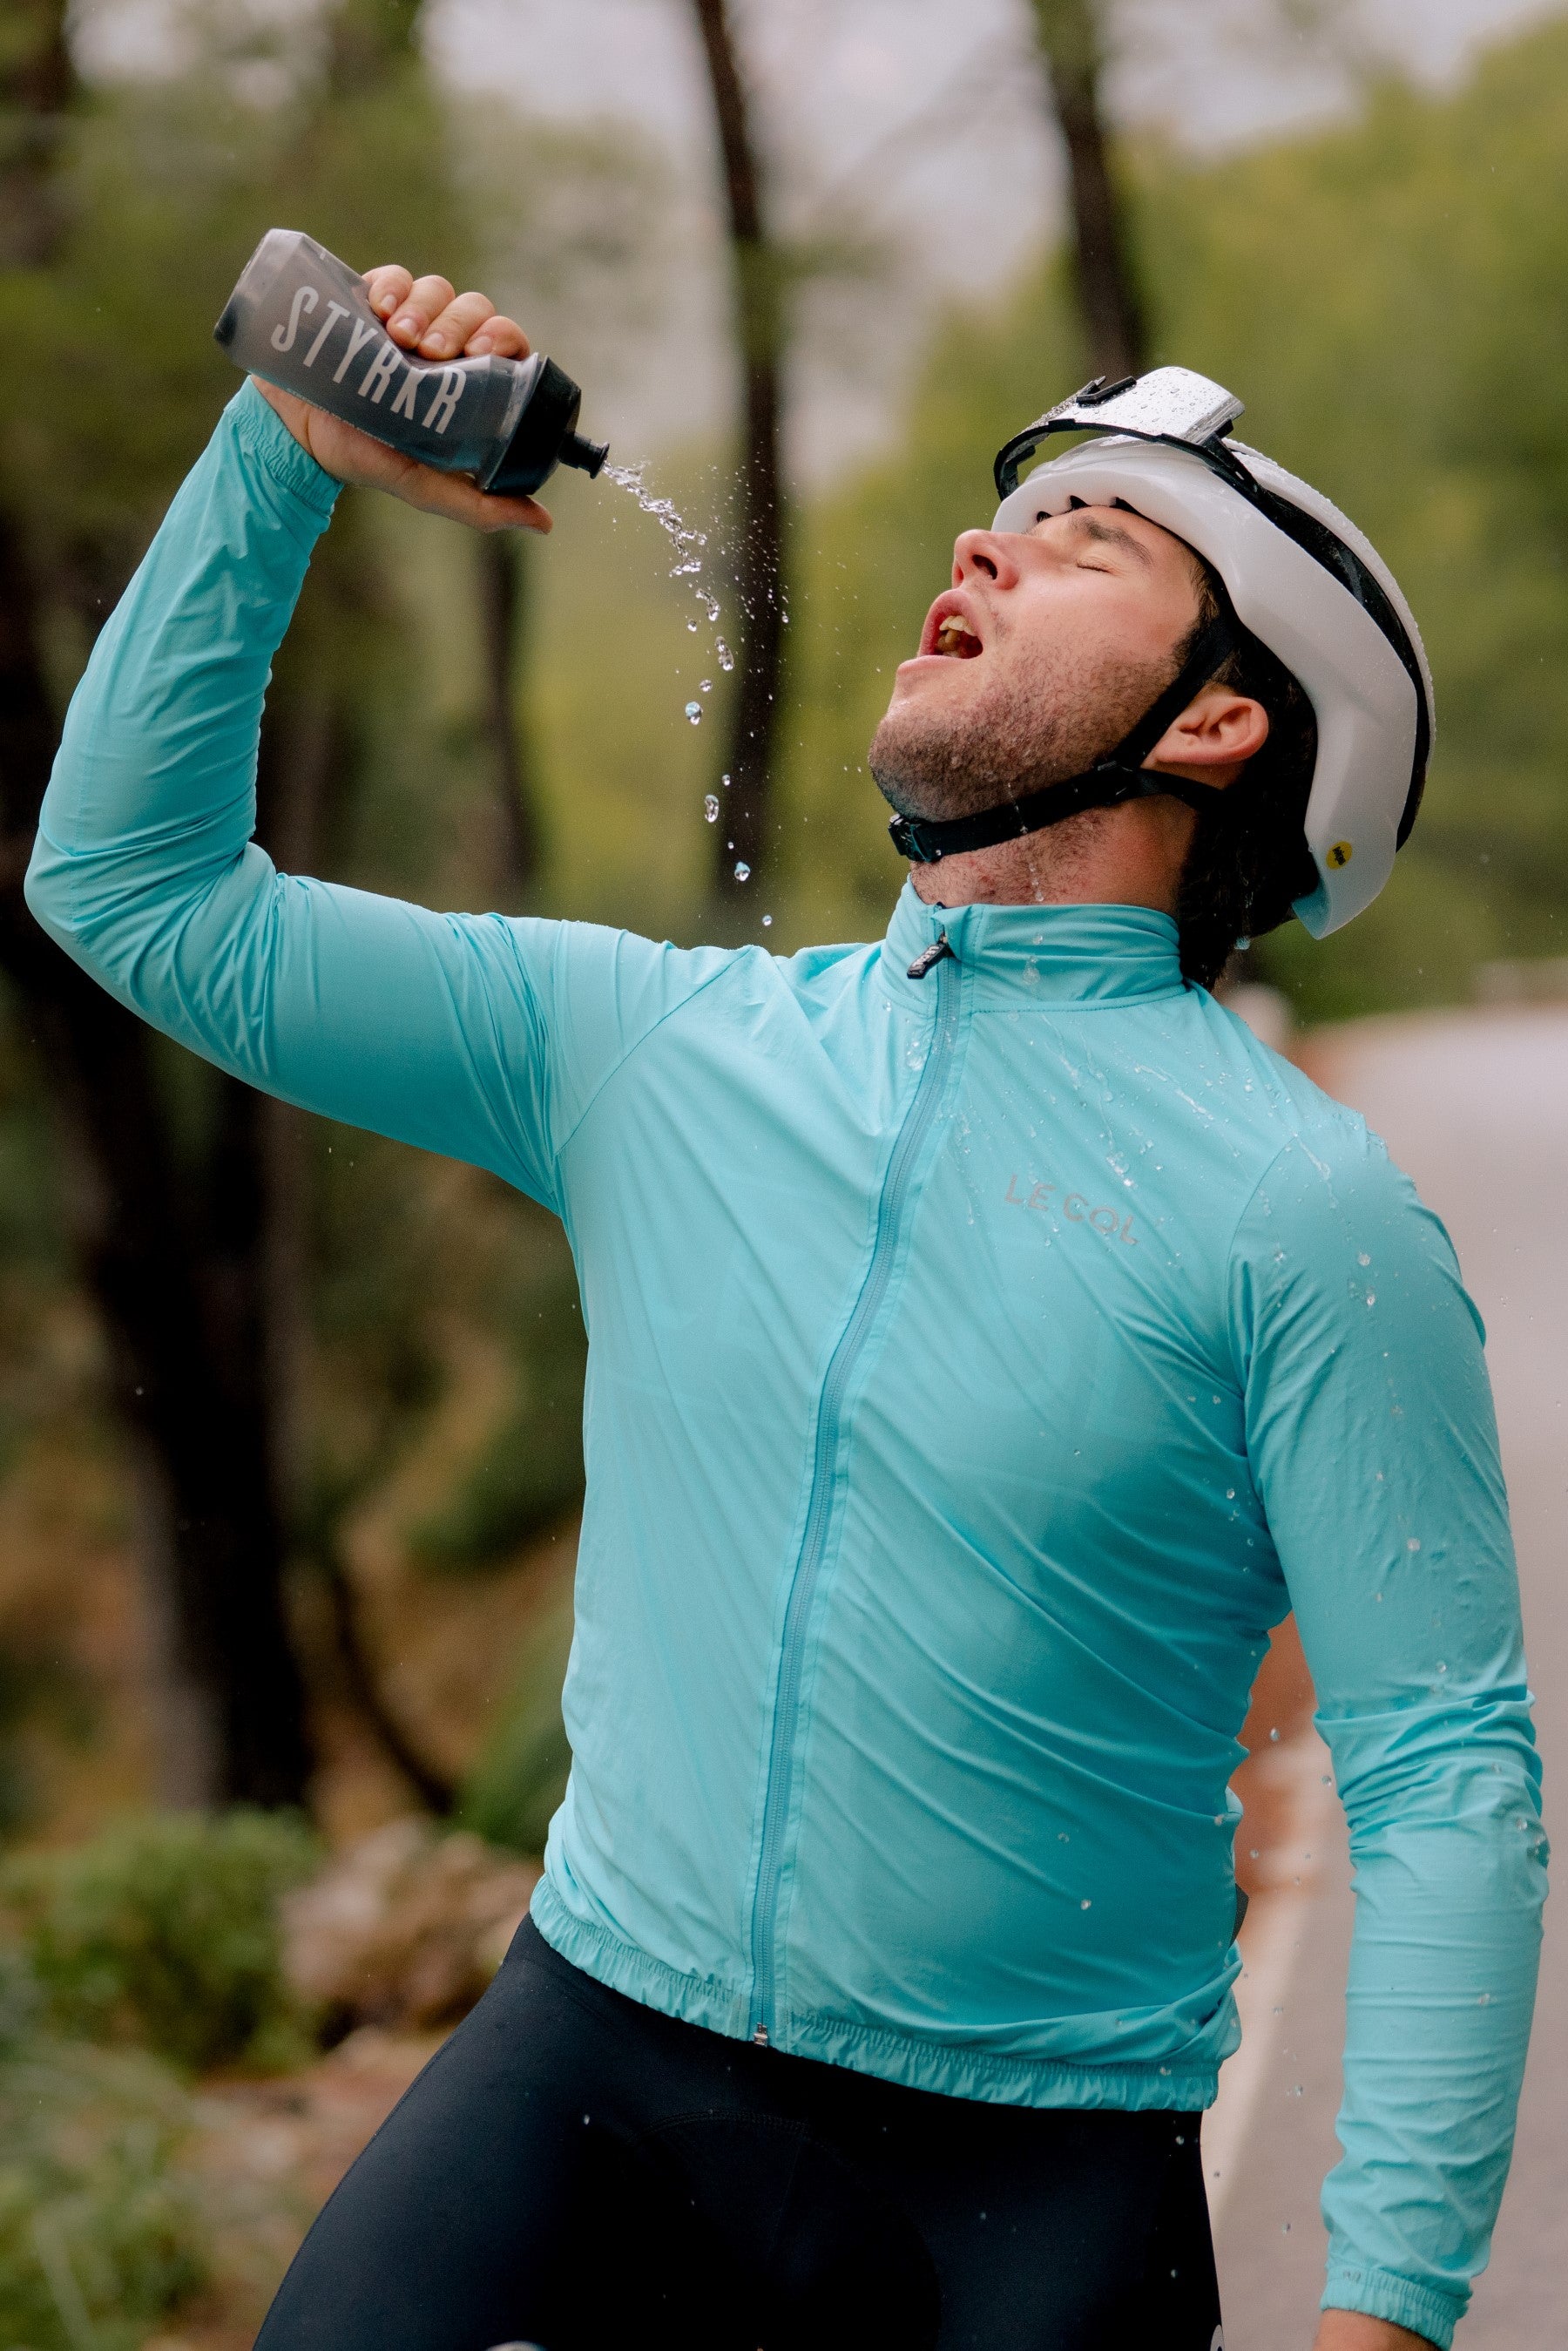 cyclist with helmet pouring water from a bottle on himself to cool down